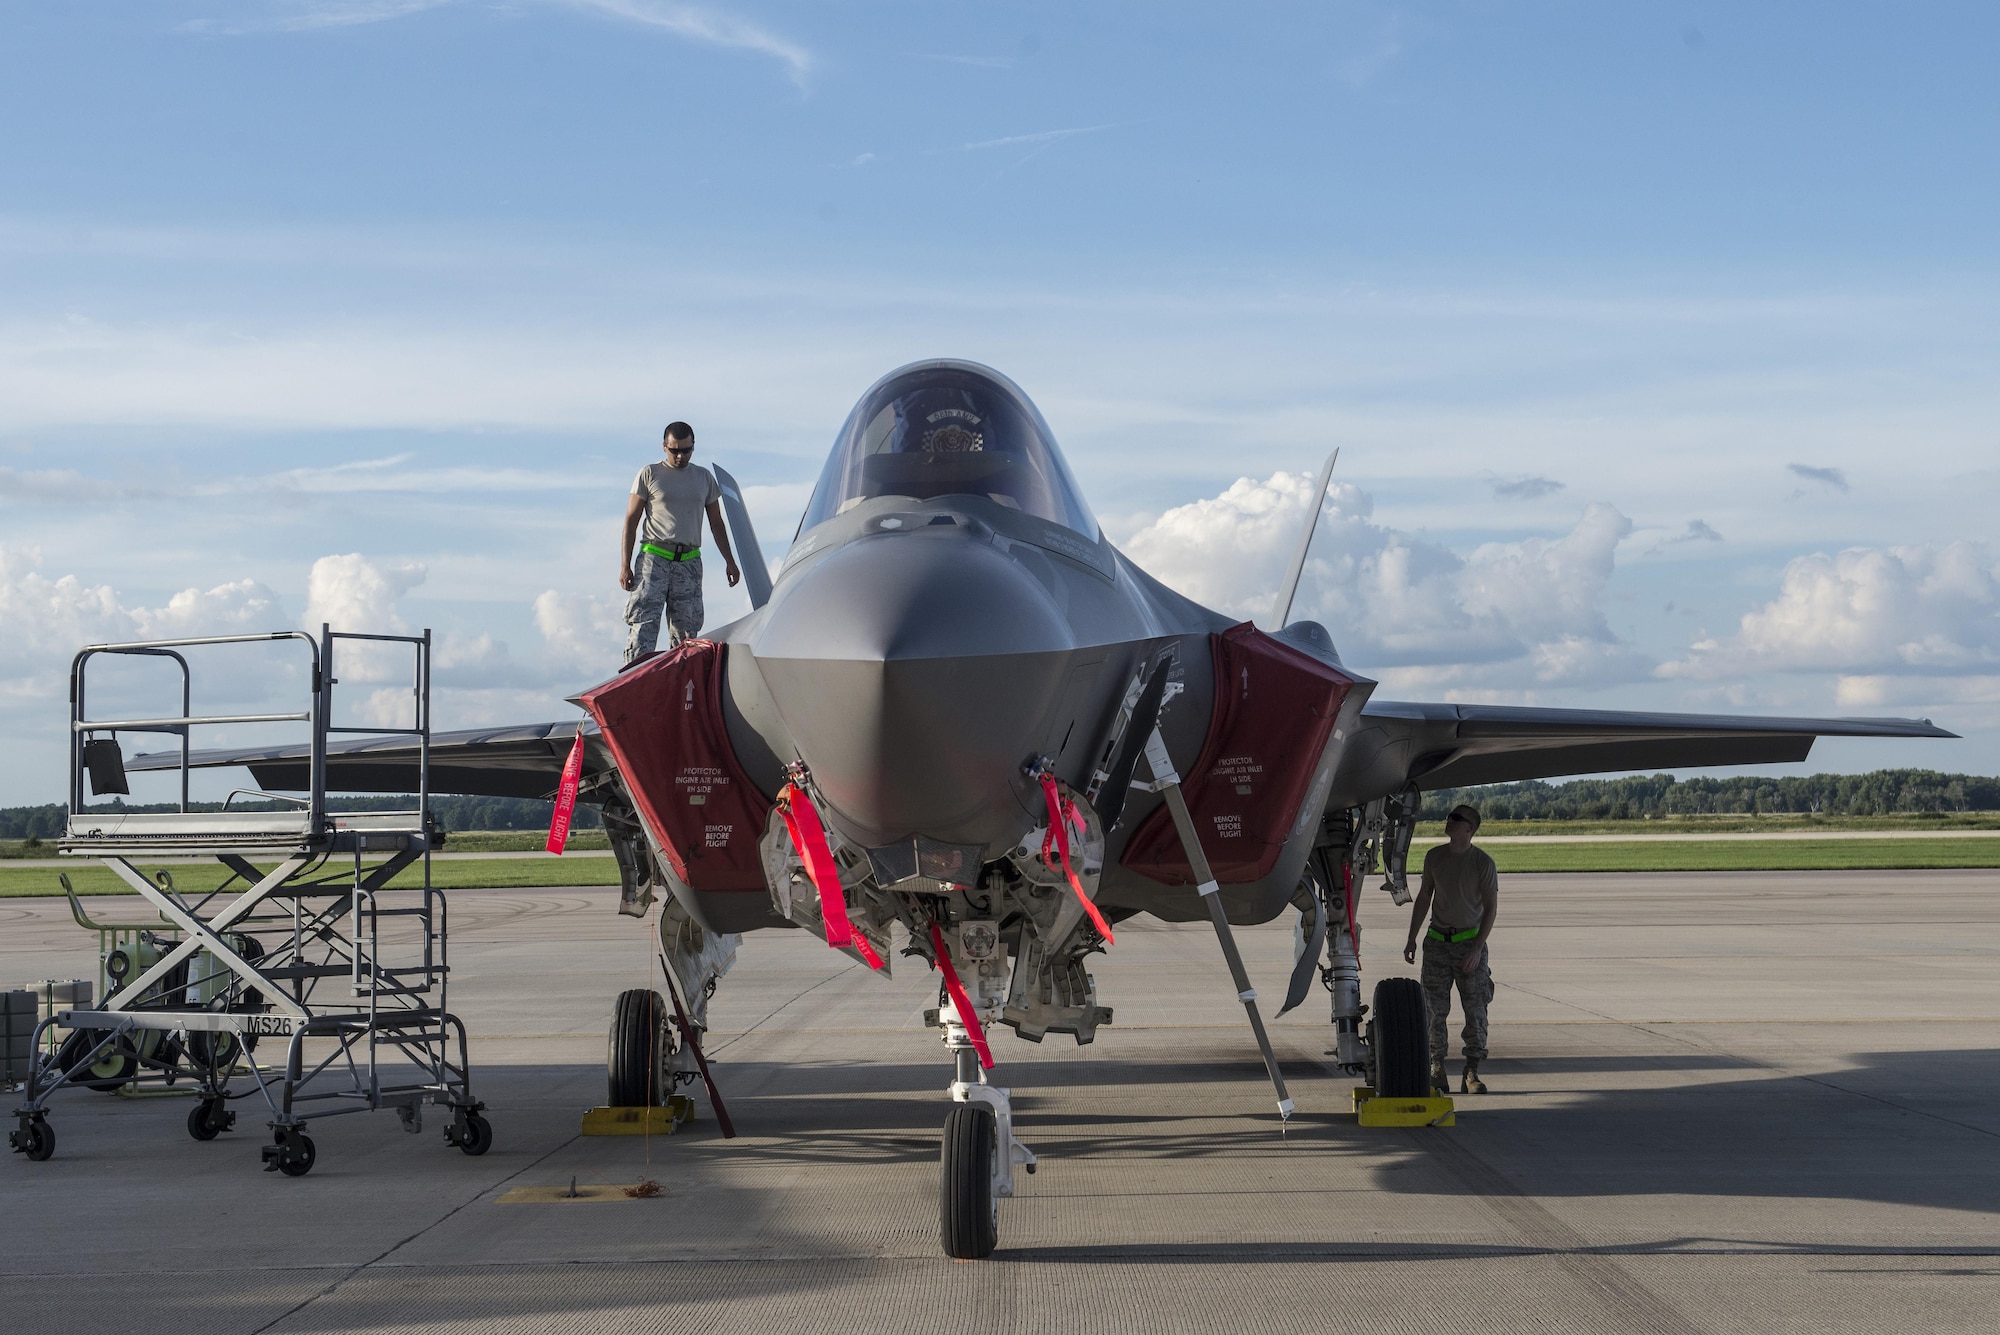 33rd Aircraft Maintenance Squadron Airmen perform a maintenance inspection on an F-35A during Exercise Northern Lightning Aug. 30, 2016, at Volk Field, Wis. Northern Lightning is a joint total force exercise between the Air National Guard, Air Force and Navy conducting offensive counter air, suppression and destruction of enemy air defense and close air support. (U.S. Air Force photo by Senior Airman Stormy Archer)